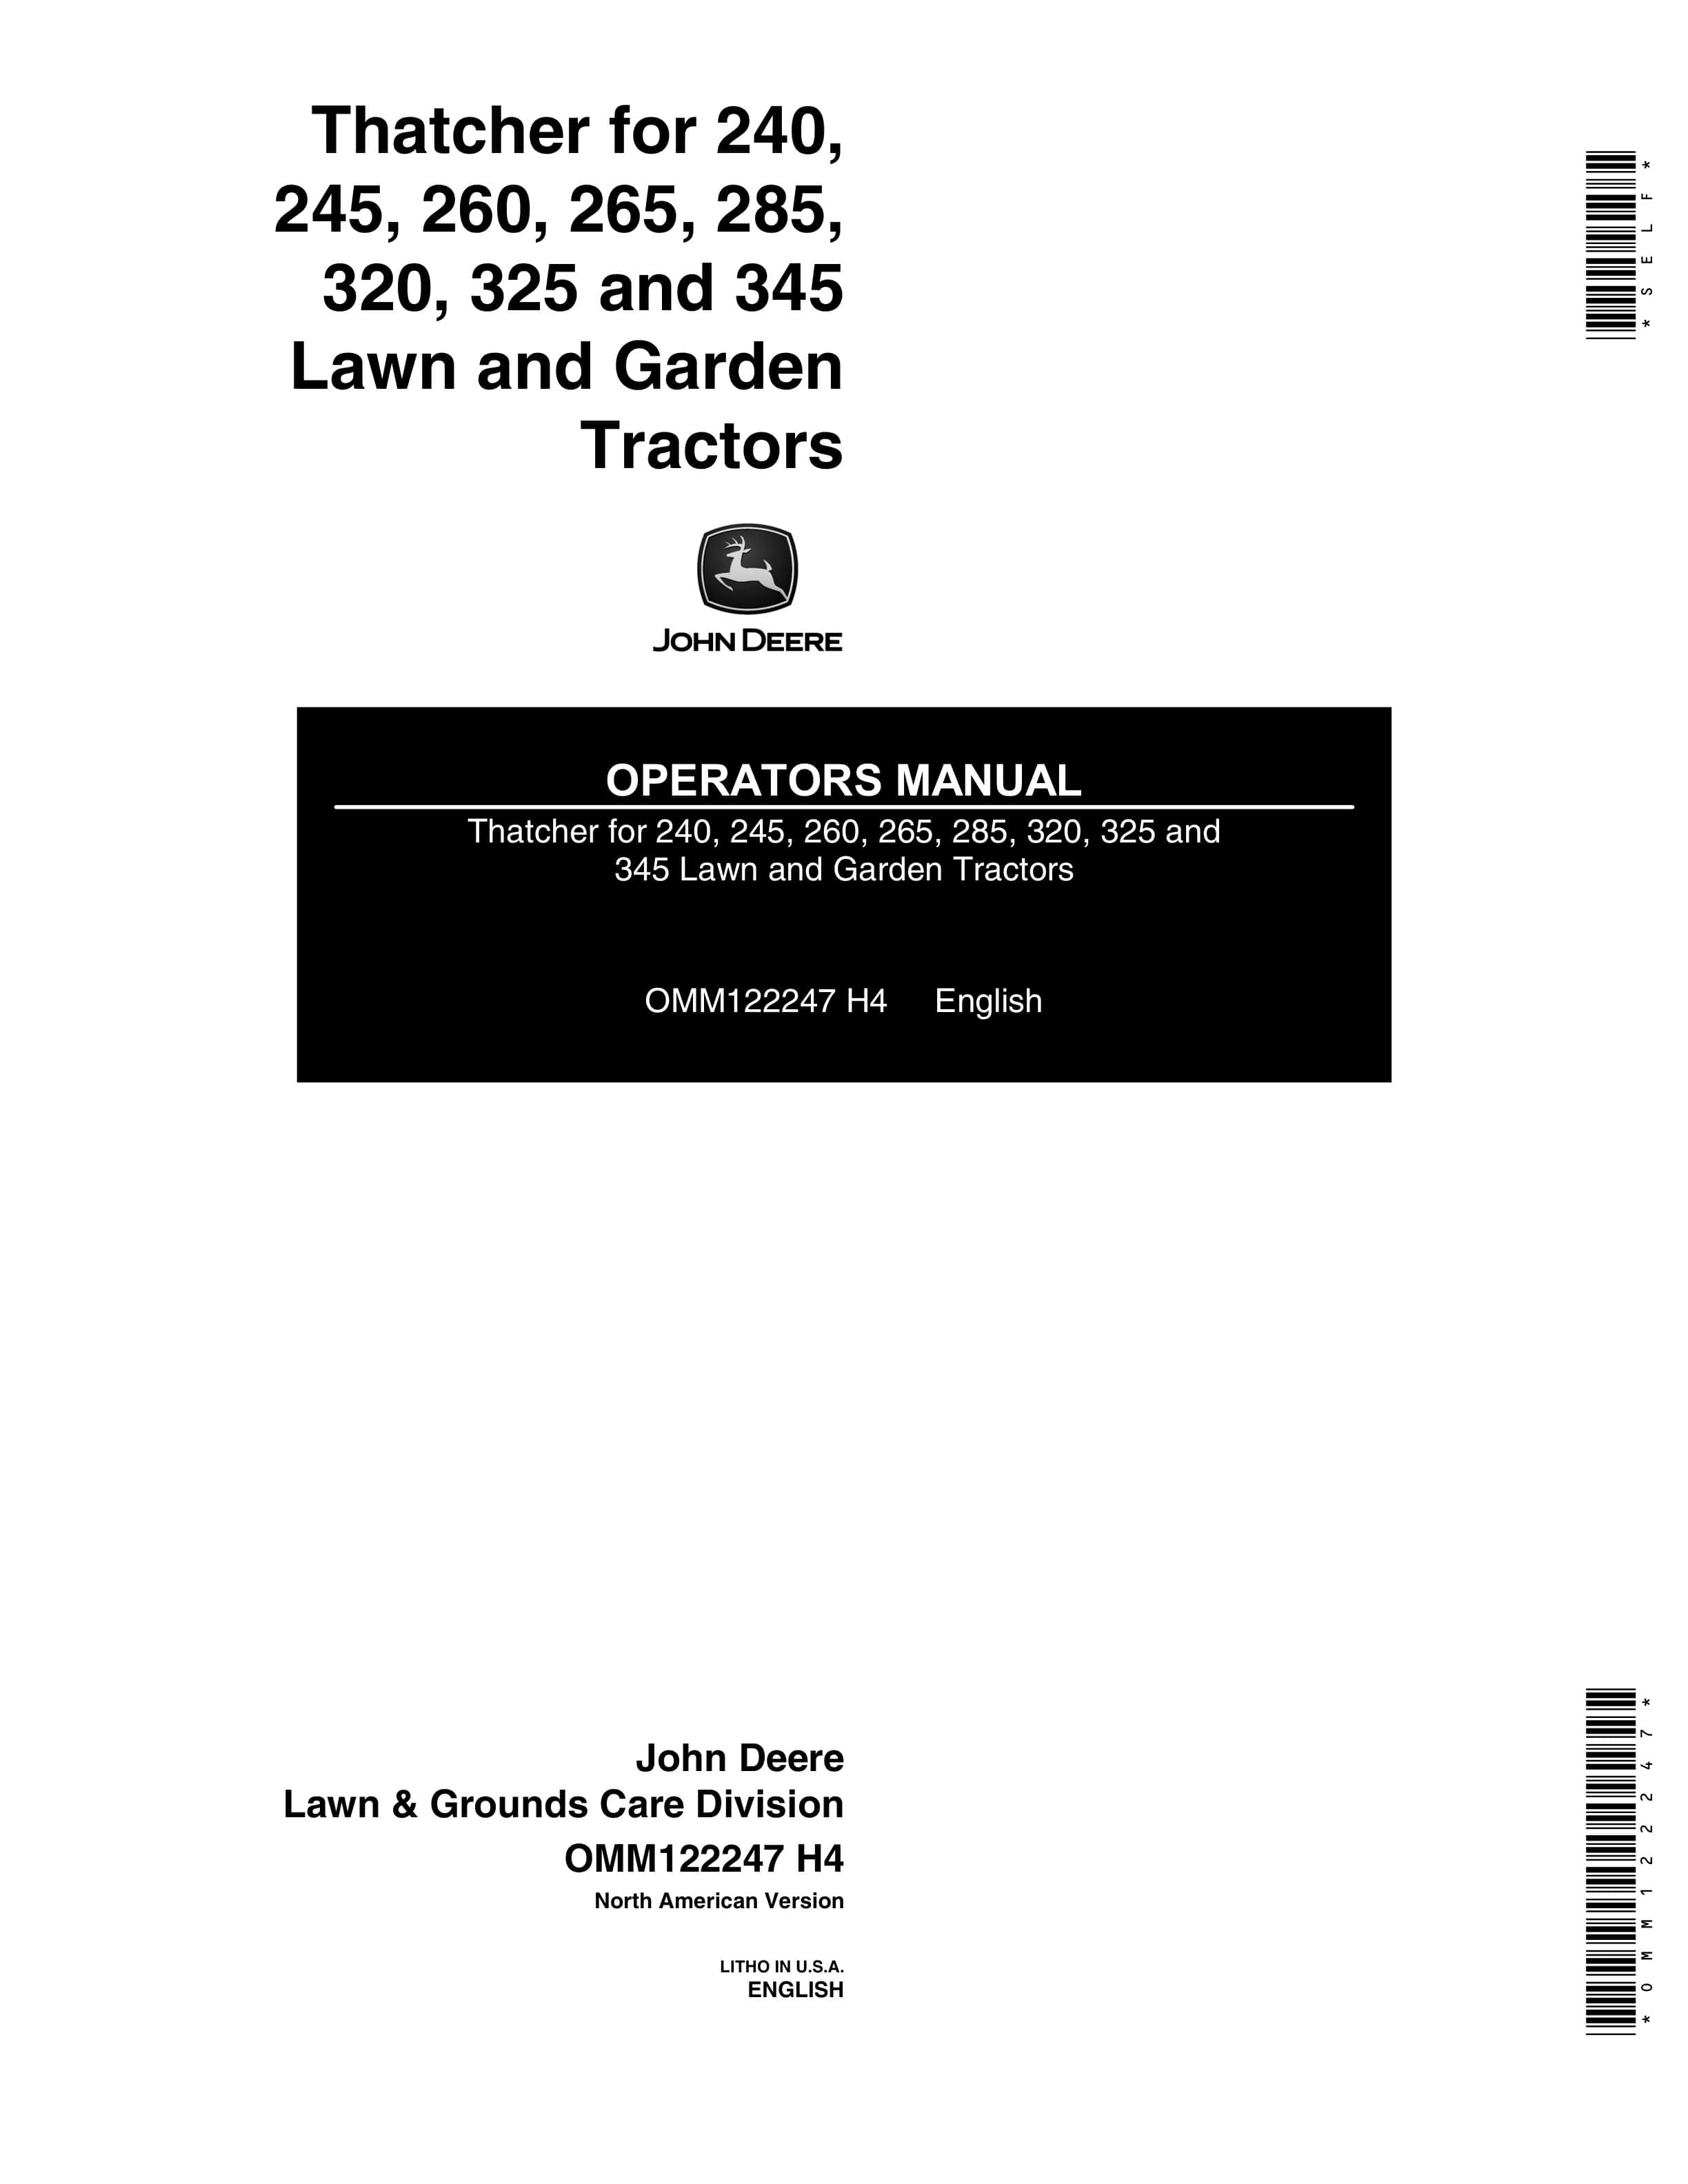 John Deere Thatcher for 240 245 260 265 285 320 325 and 345 Lawn and Garden Tractors Operator Manual OMM122247 1